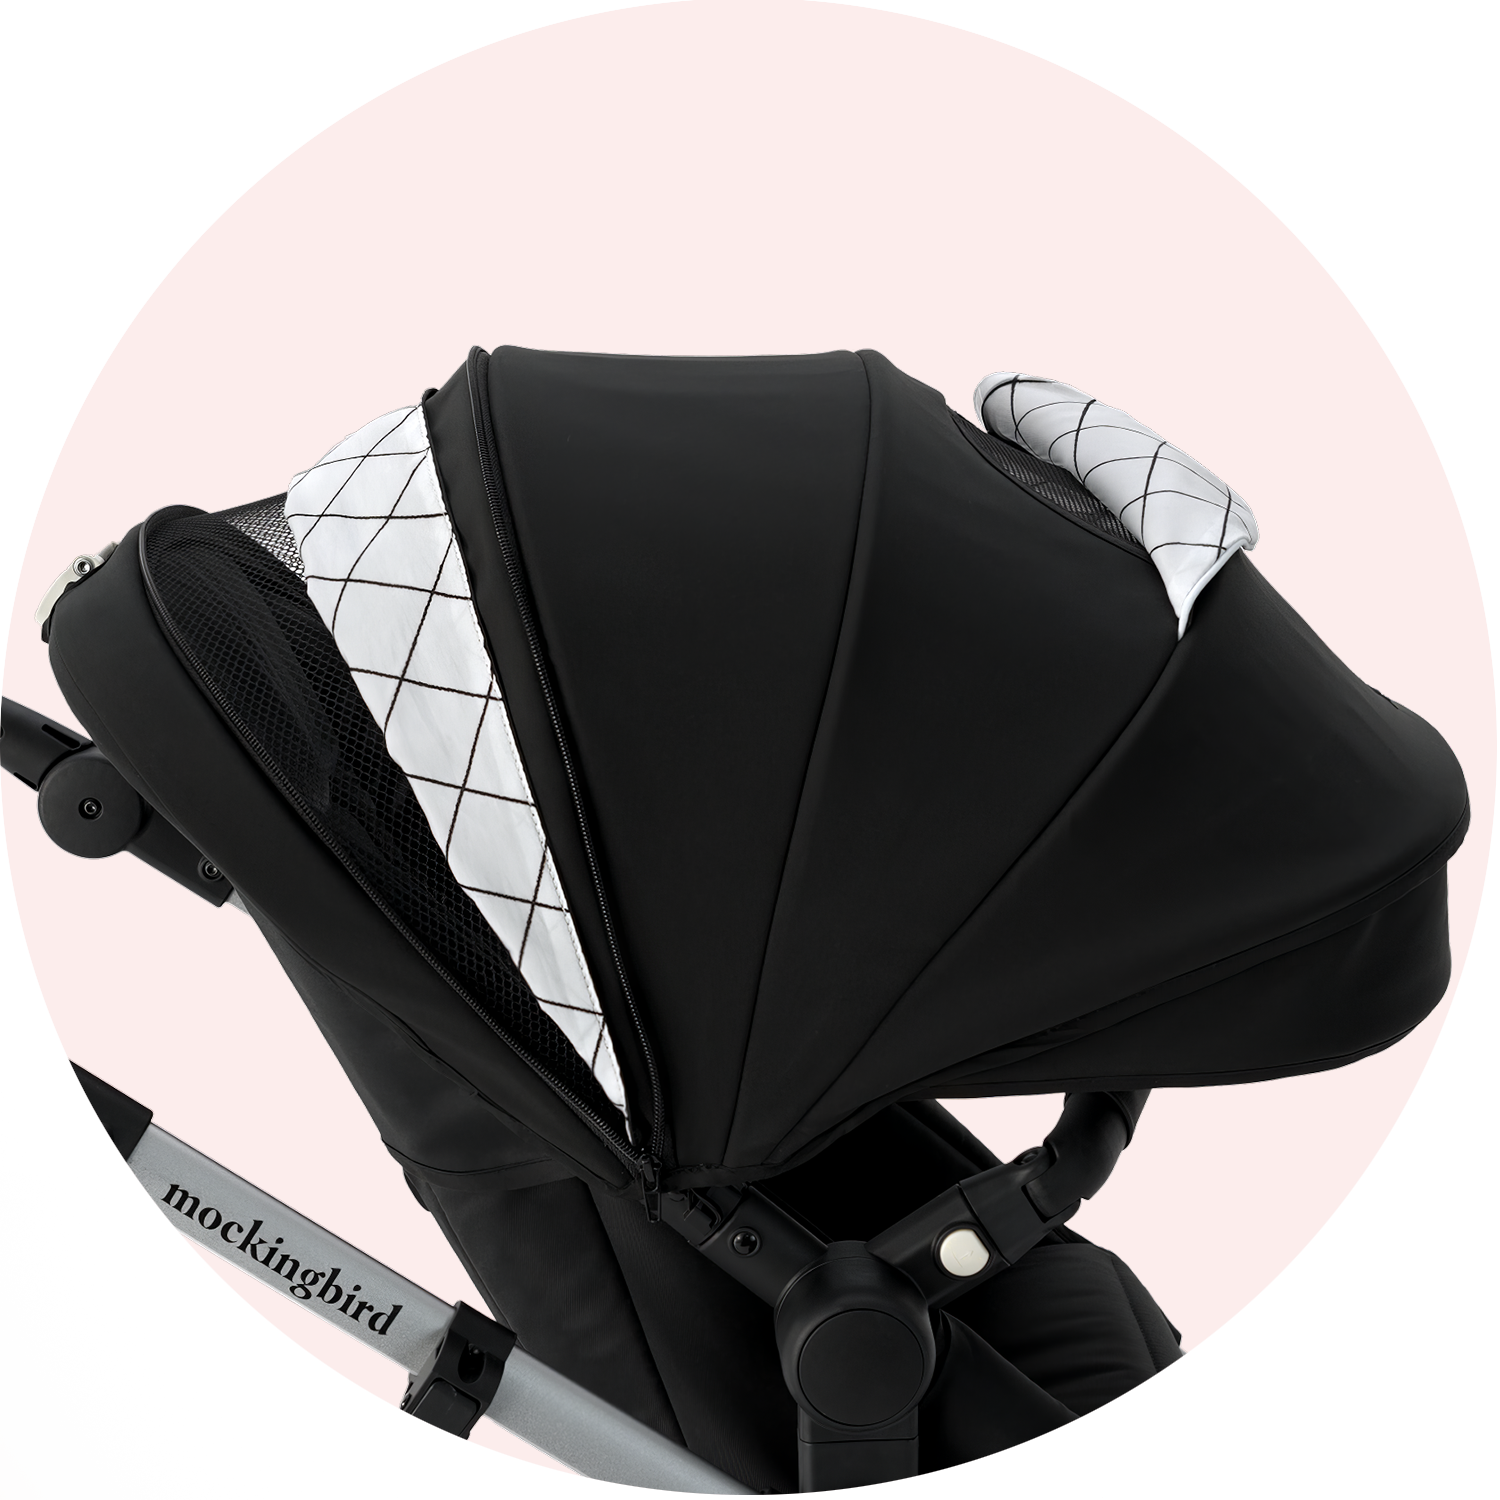 Black and grey baby stroller from mockingbird brand with a hood, extended canopy, and visible geometric pattern on the inner lining, set against a pale pink background.